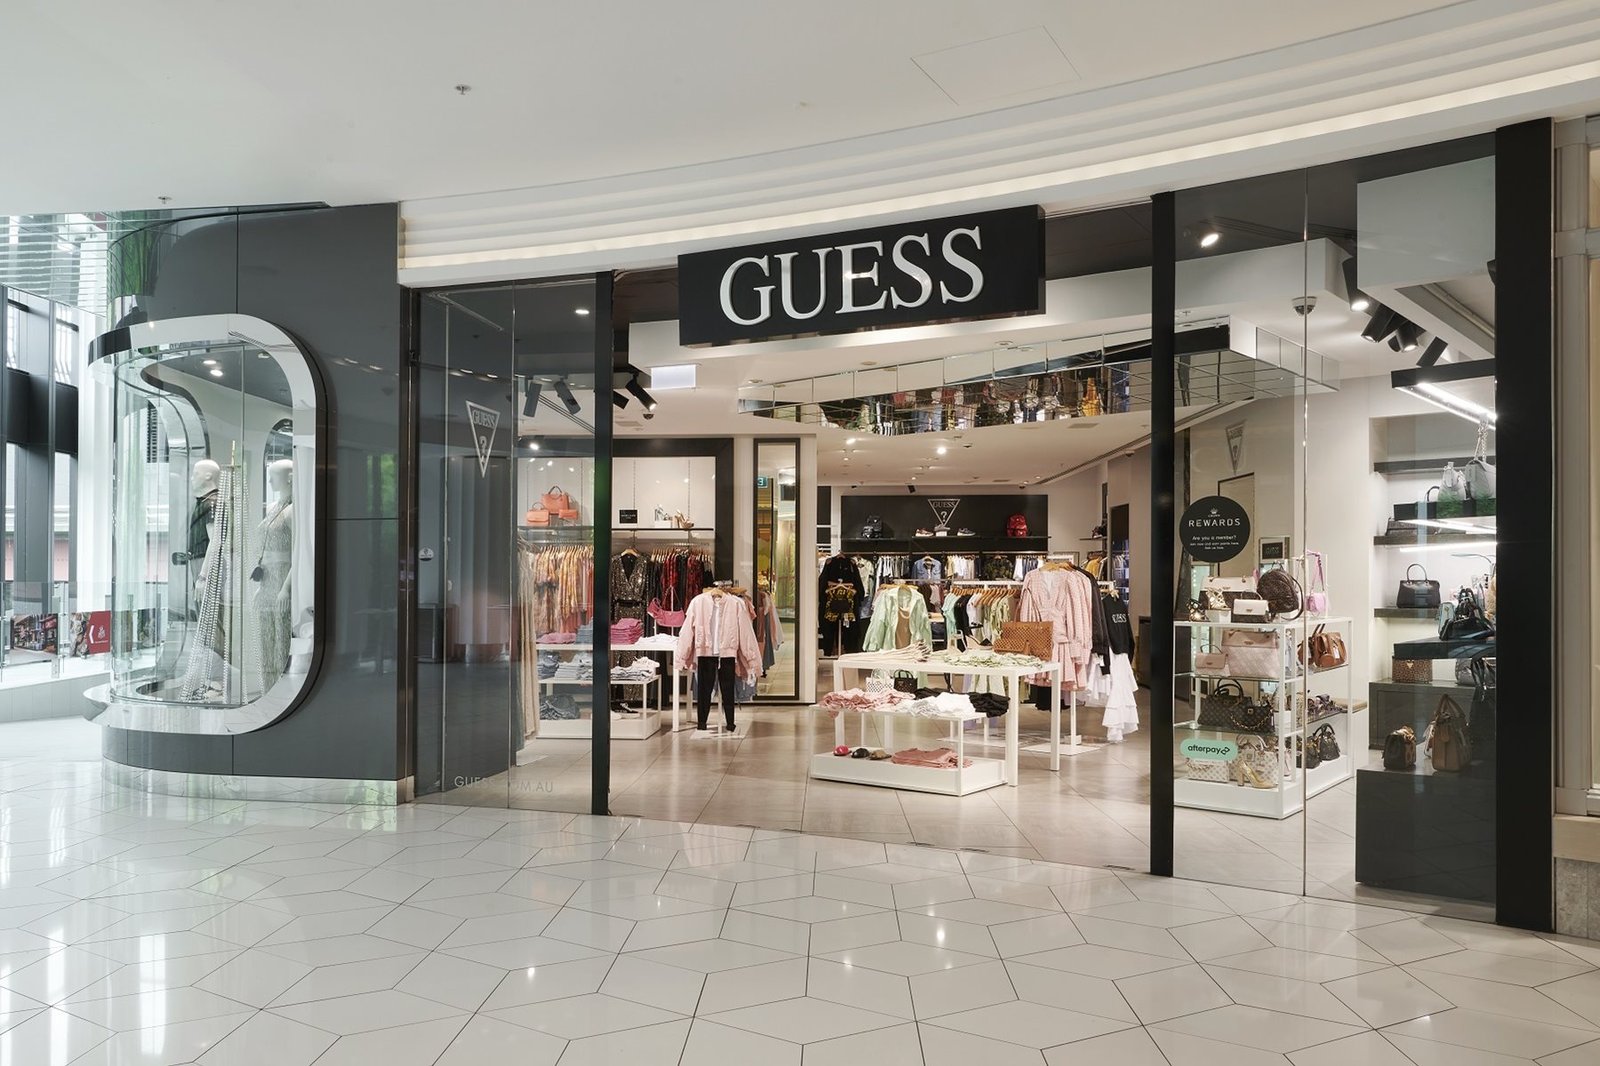 GUESS - Crown Melbourne